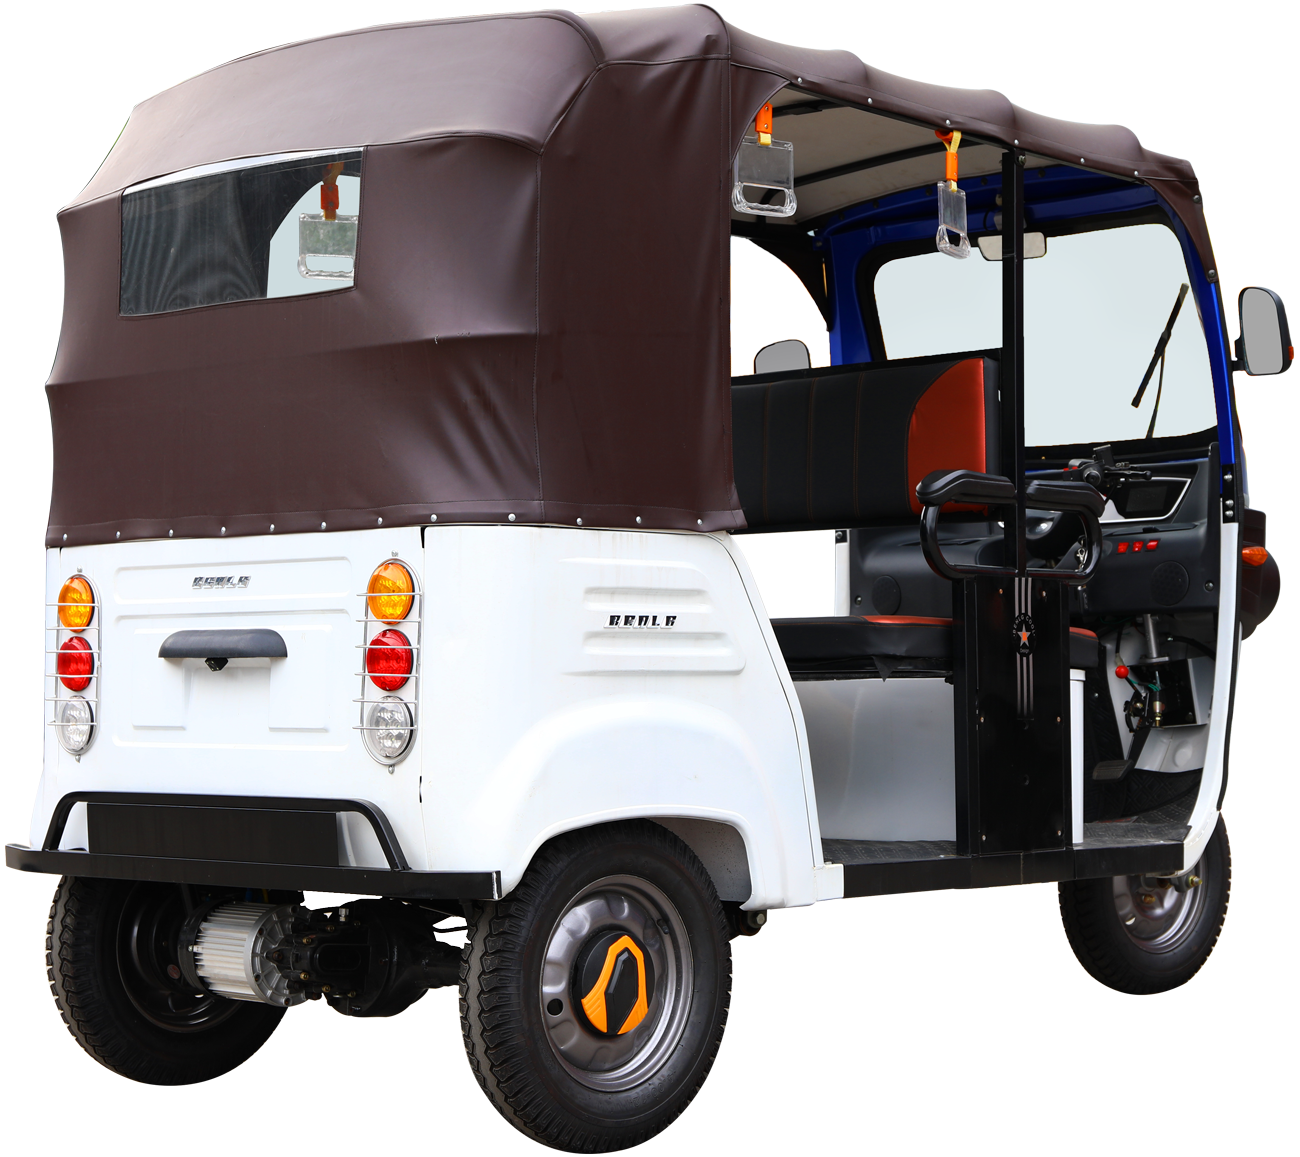 Supply 60V Vacation-3 Electric tricycle With Battery powered 3 wheel, 60V Vacation-3 Electric tricycle With Battery powered 3 wheel Factory Quotes, 60V Vacation-3 Electric tricycle With Battery powered 3 wheel Producers